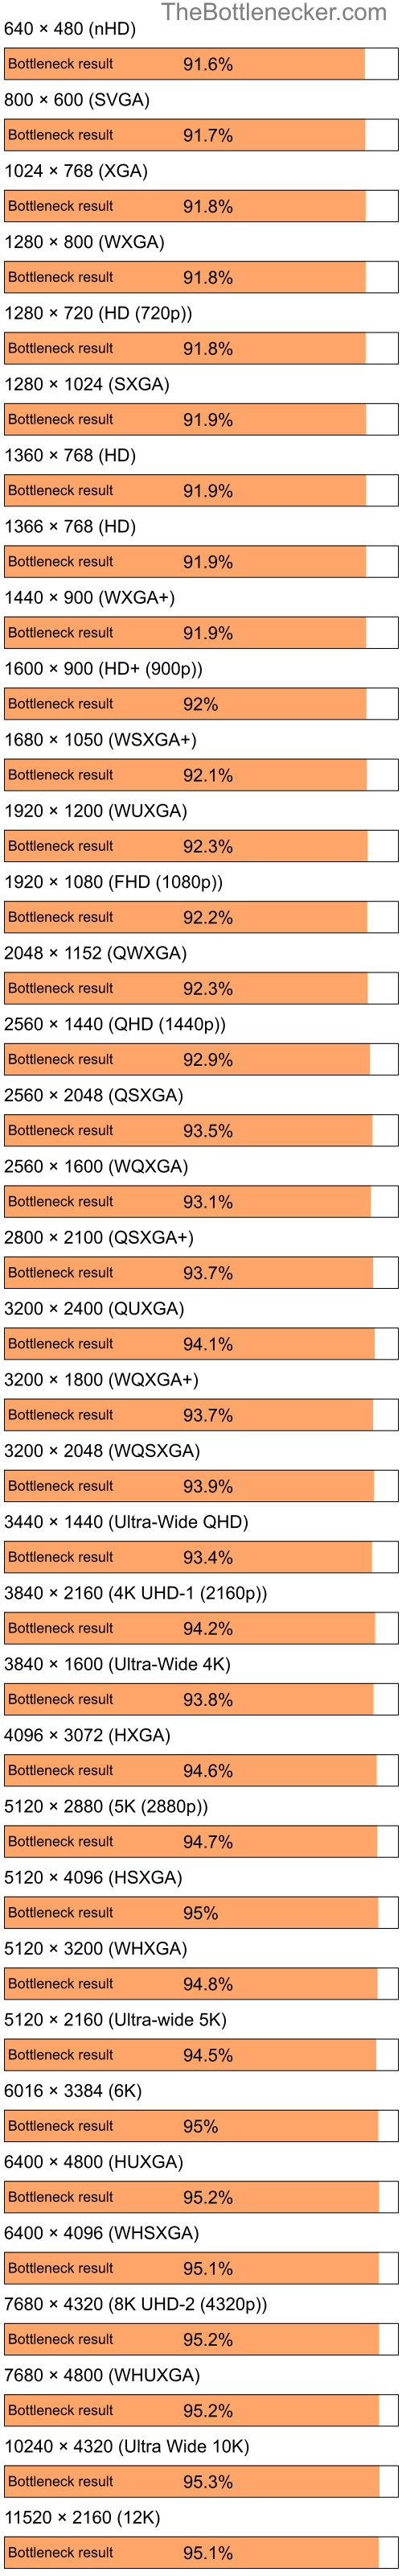 Bottleneck results by resolution for Intel Pentium 4 and NVIDIA GeForce2 MX 200 in General Tasks